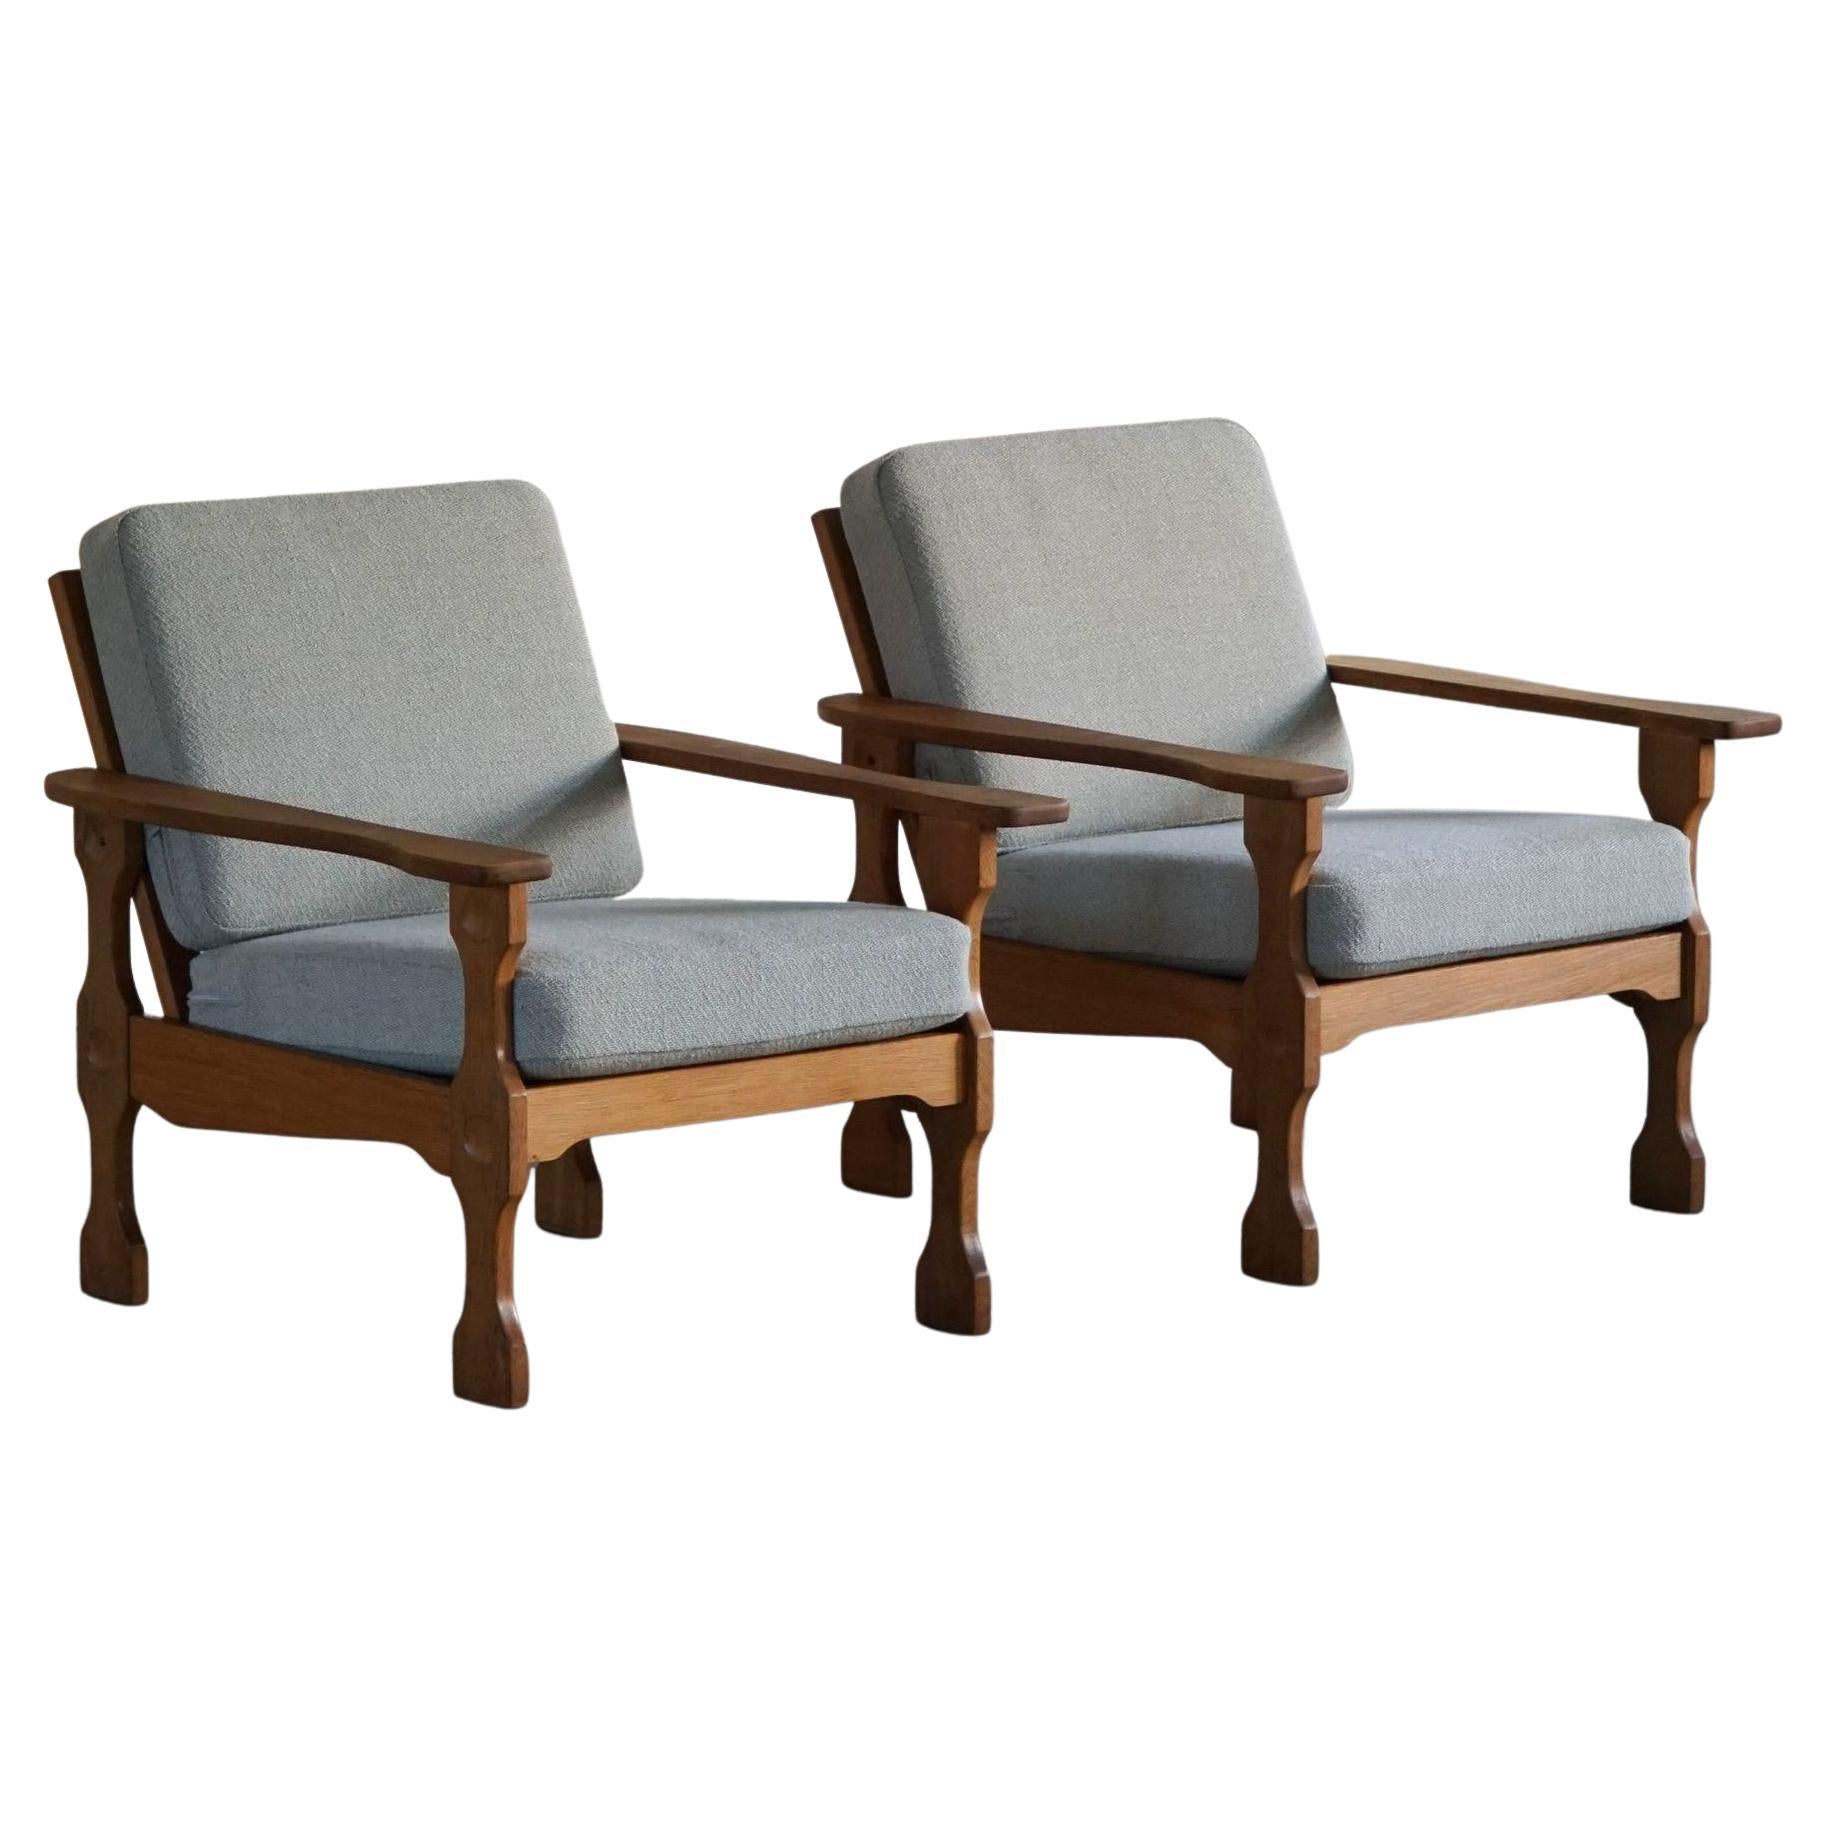 Pair of Danish Modern Lounge Chairs, Reupholstered, Henning Kjærnulf Style, 1960 For Sale